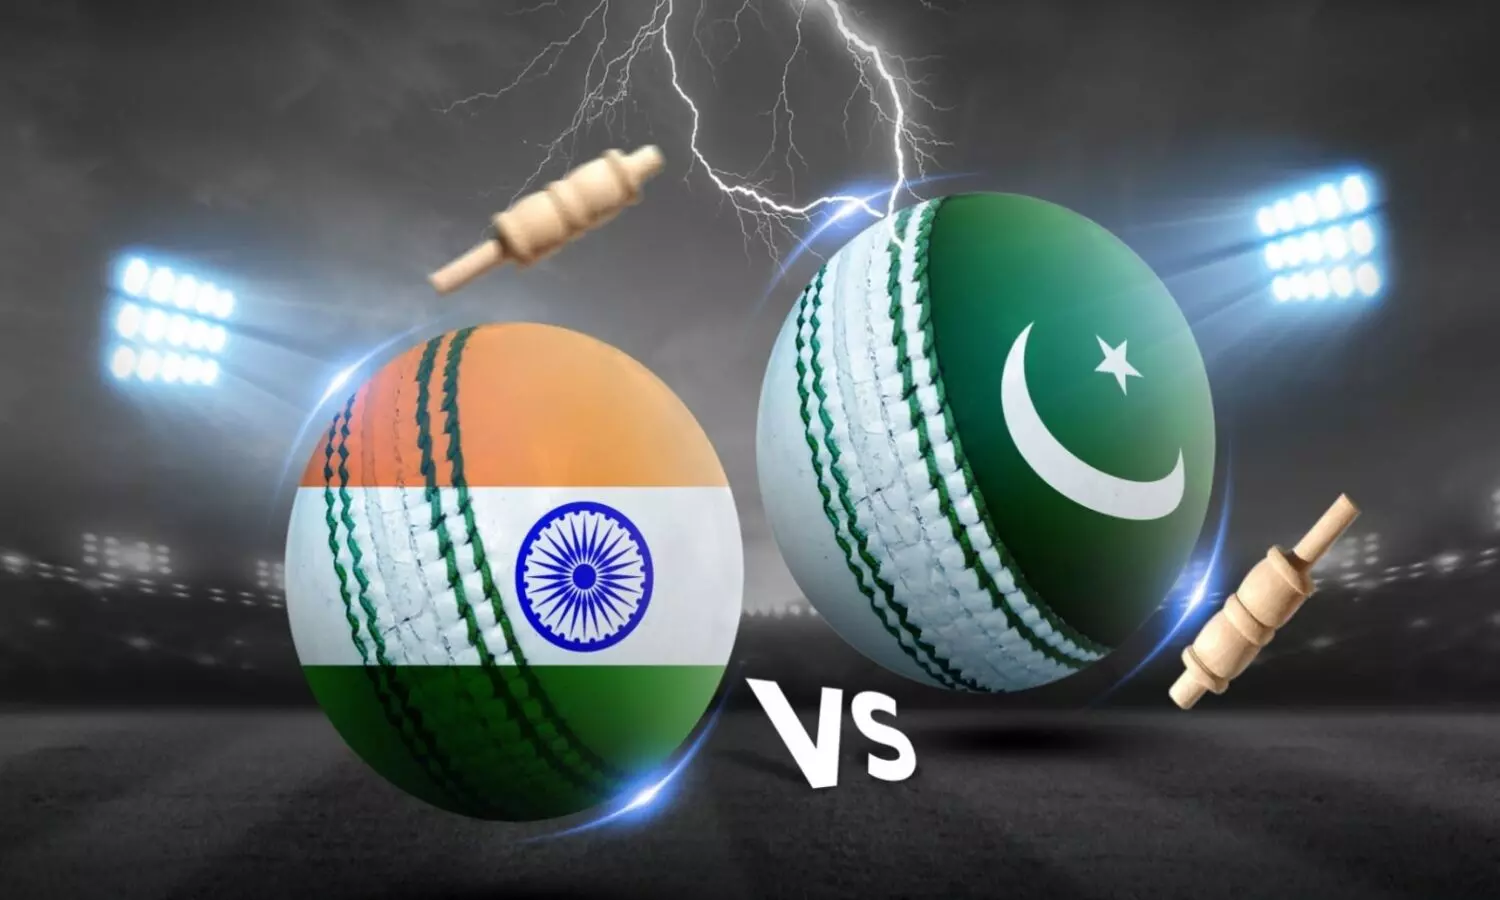 T20 World Cup 2022 IND vs PAK